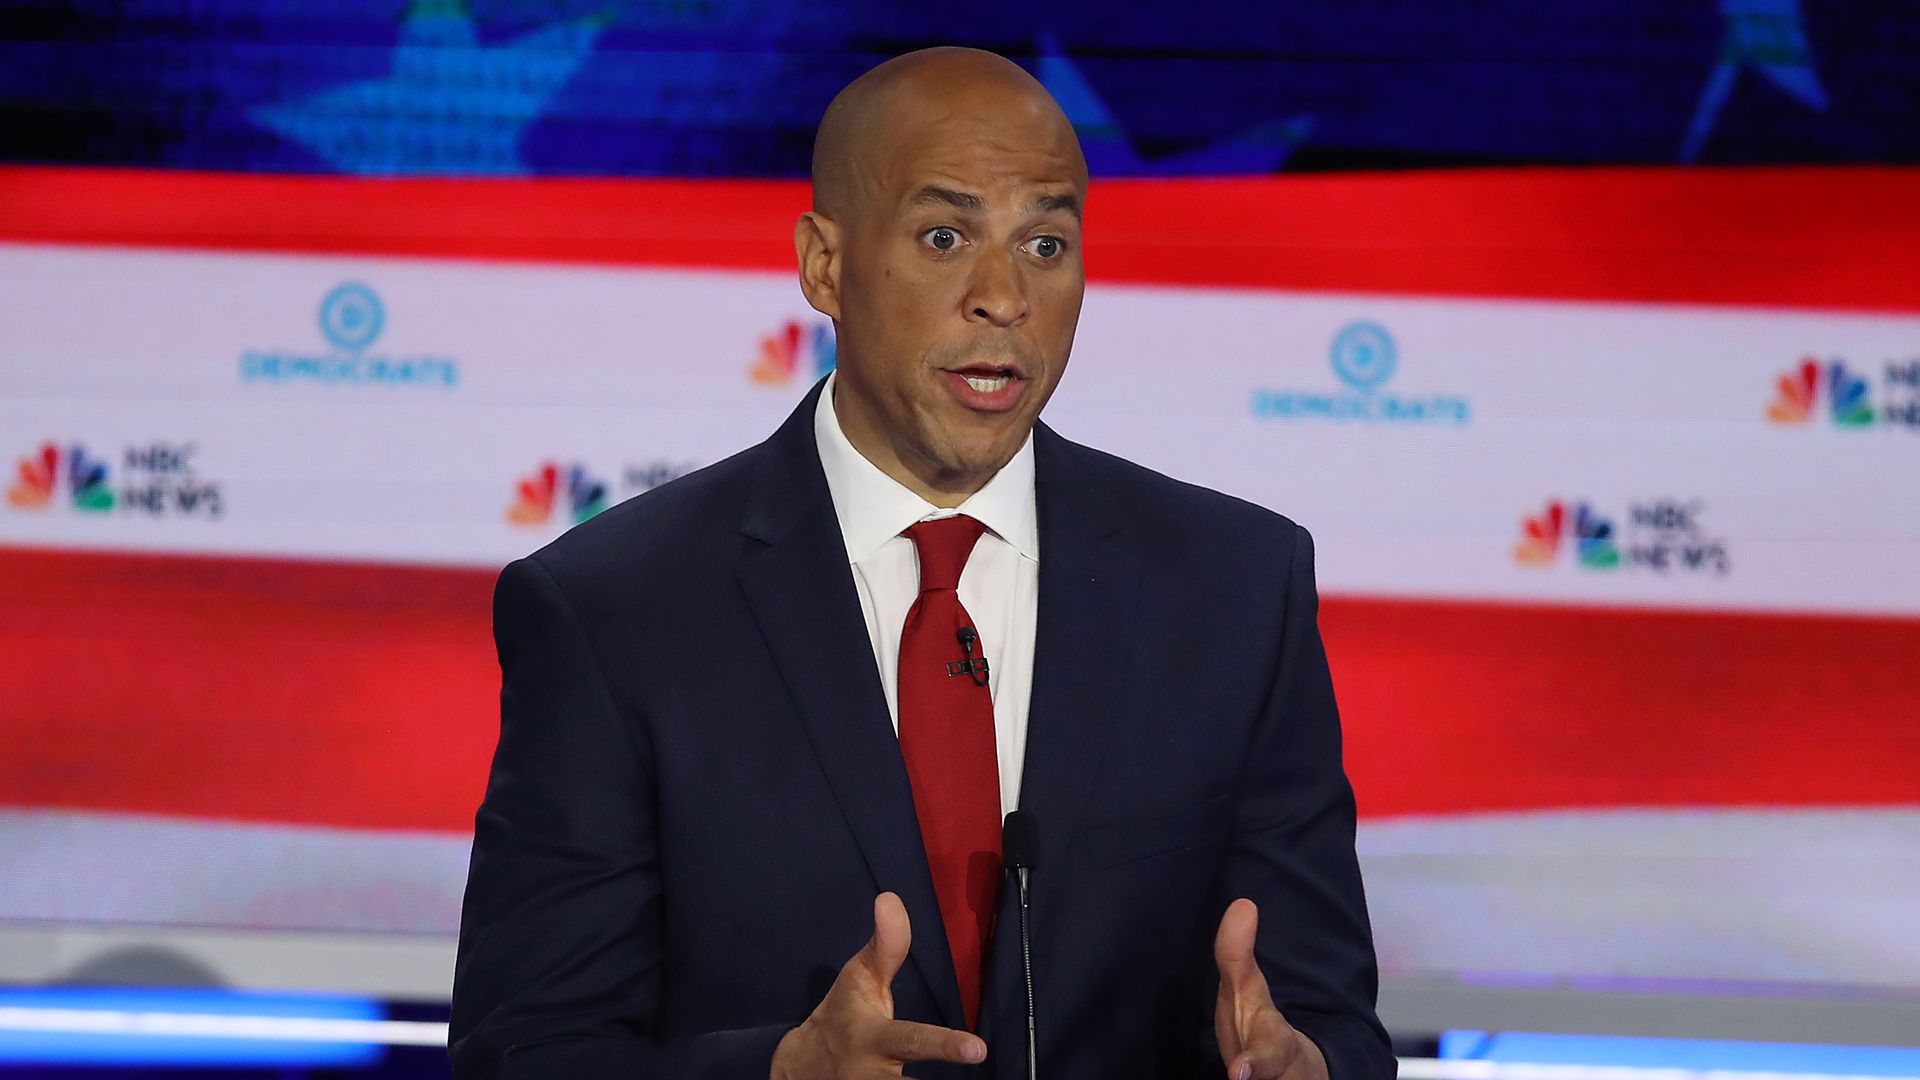 Sen. Cory Booker at the first round of 2020 Democratic primary debates